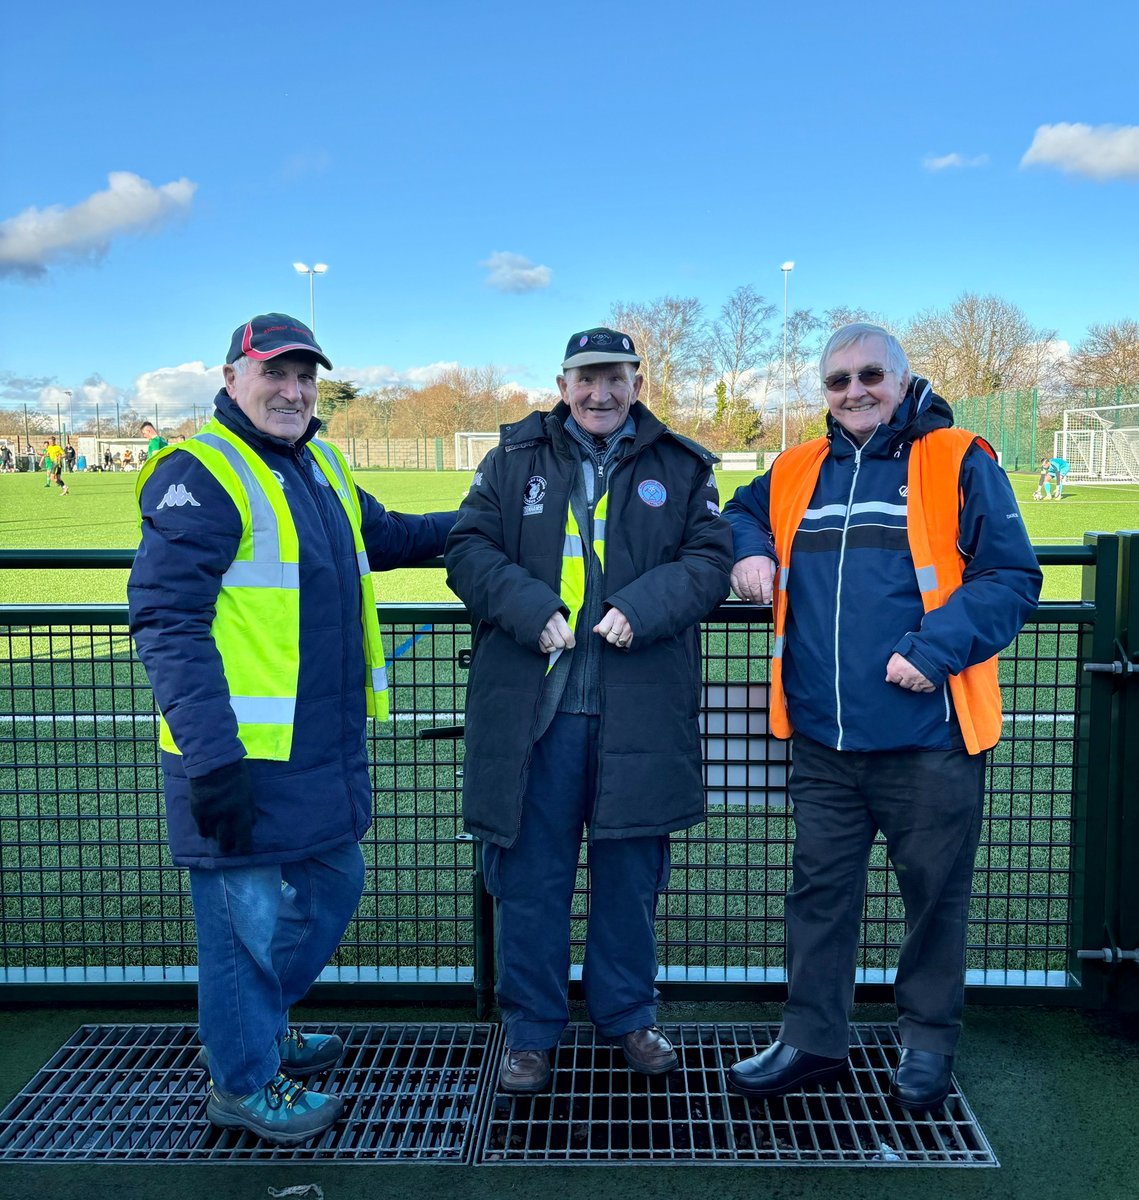 A big thank you to the dedicated stewards across #DorsetFootball! They ensure visitors are safely parked and greeted at the turnstiles, distribute programmes, oversee off-pitch operations & maintain order and ensure everyone's safety. Your efforts are truly appreciated!